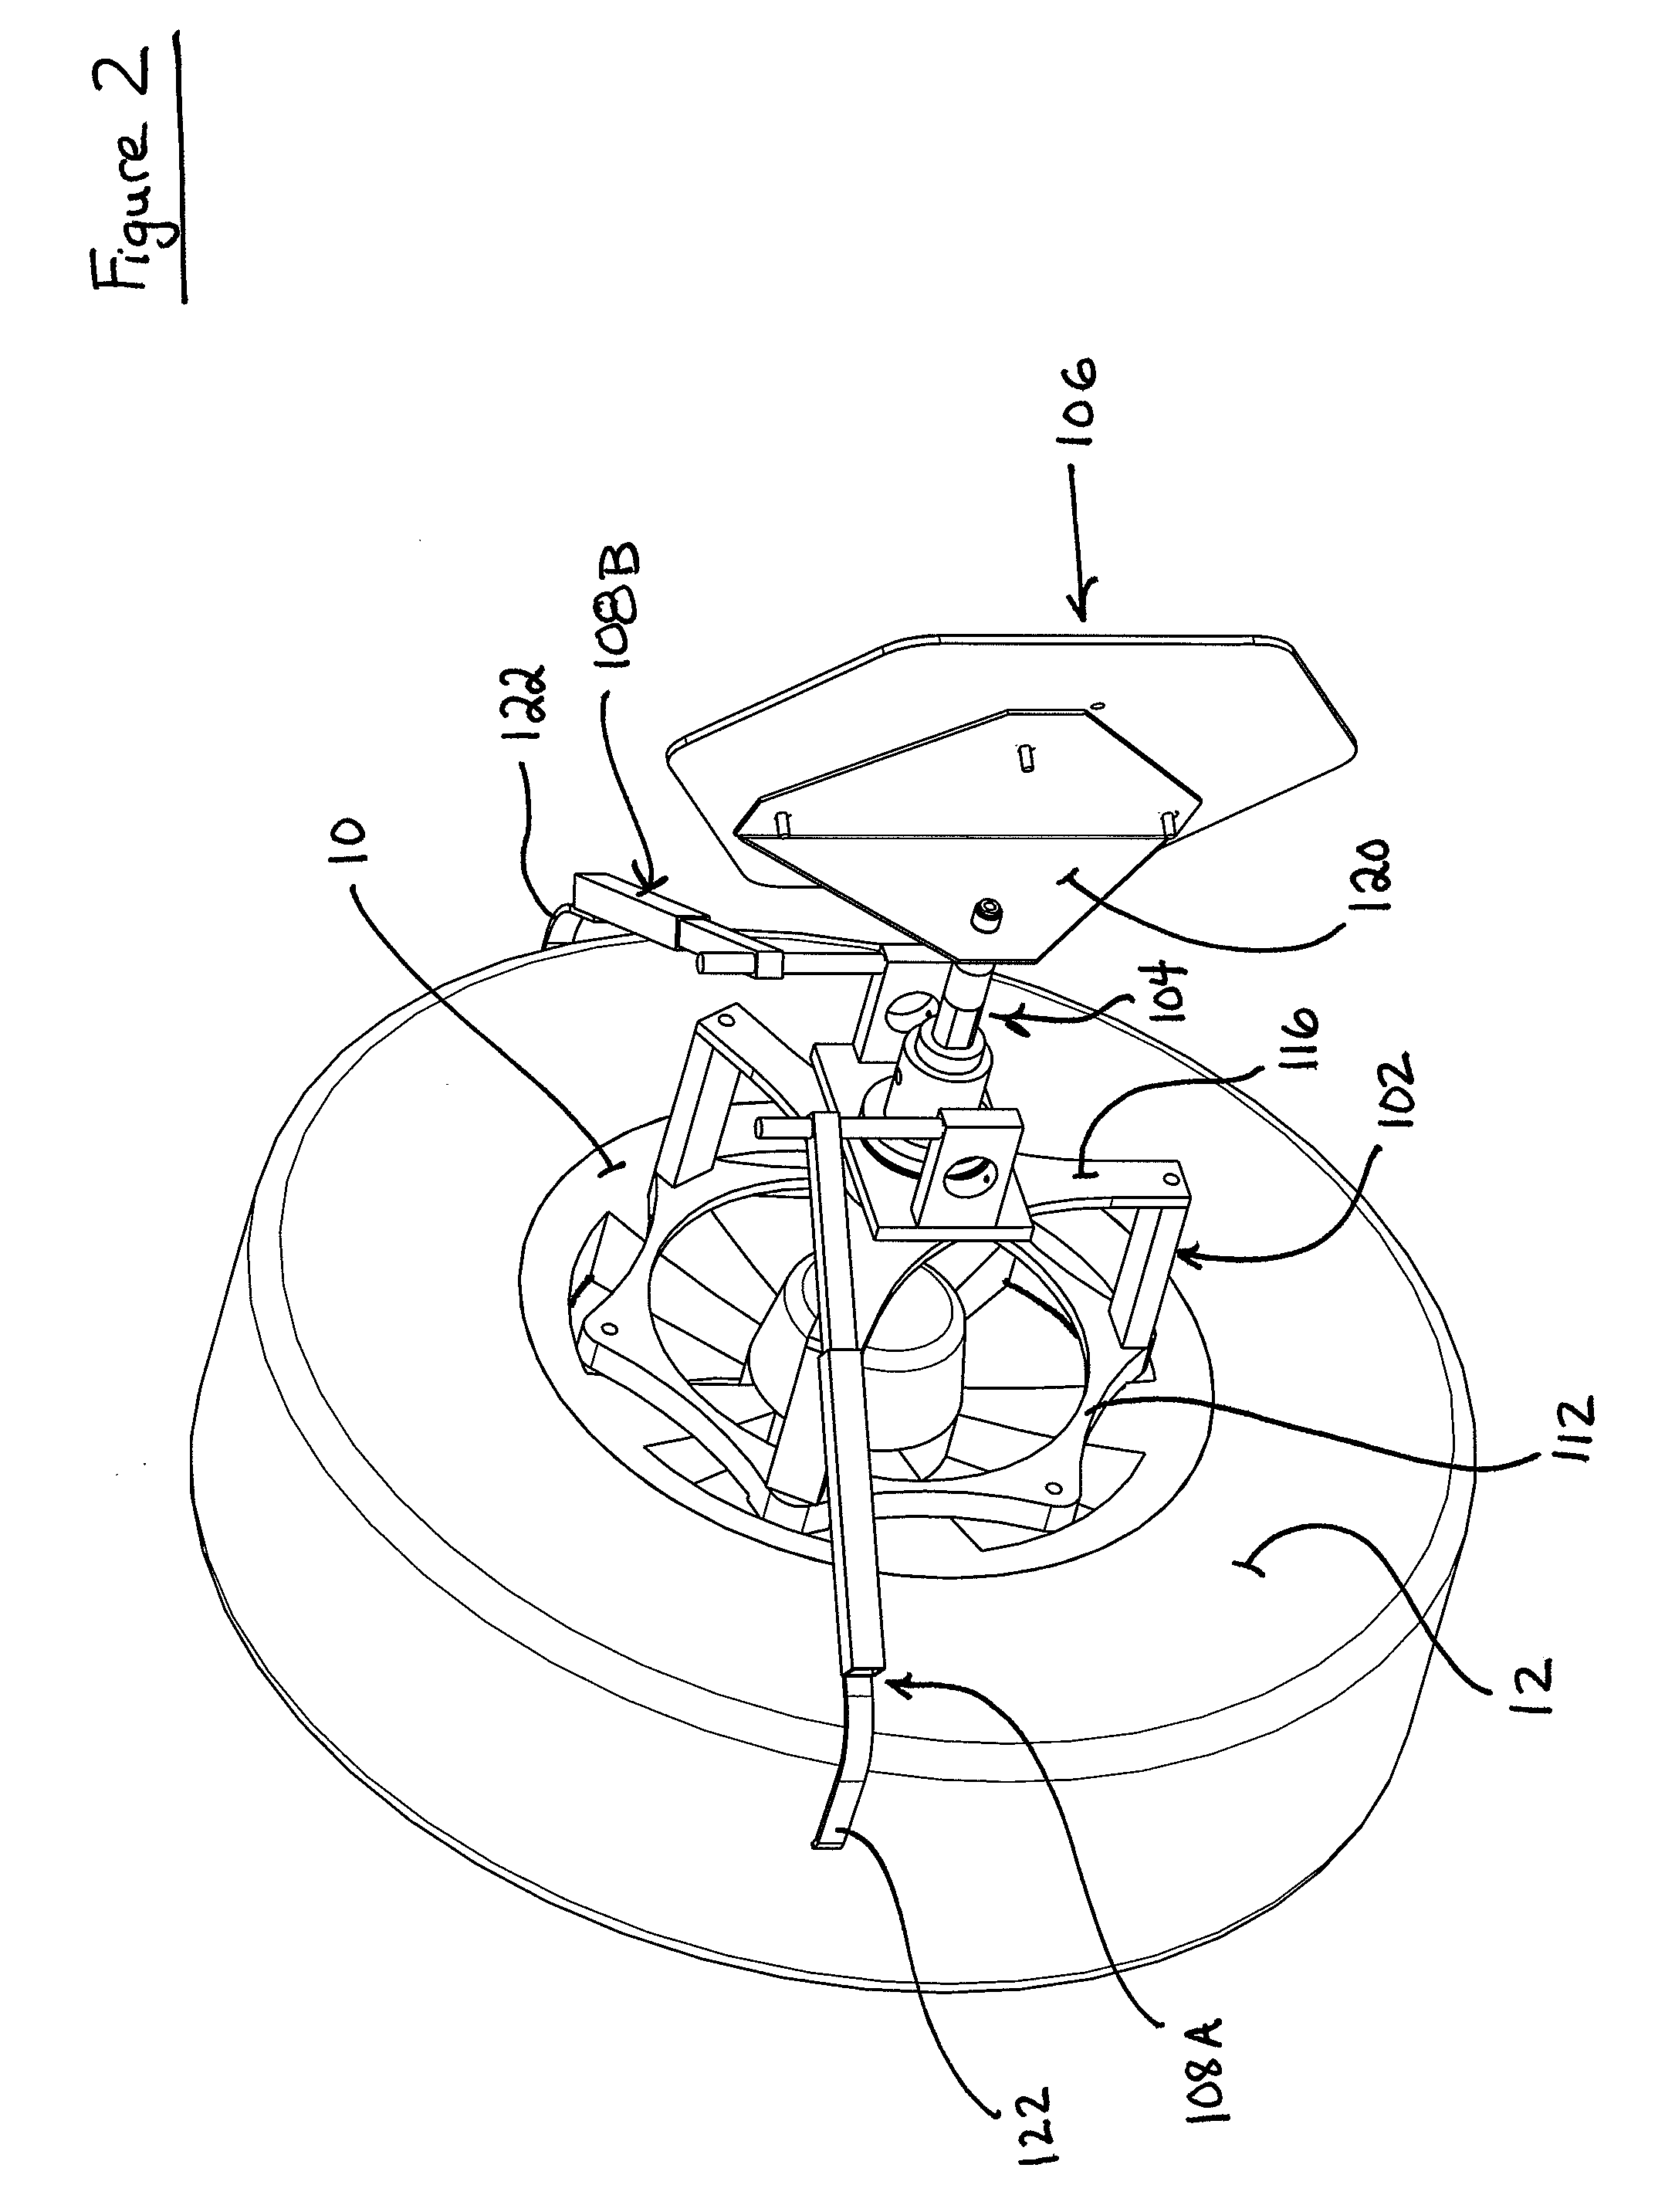 Method and Apparatus For Vehicle Service System Optical Target